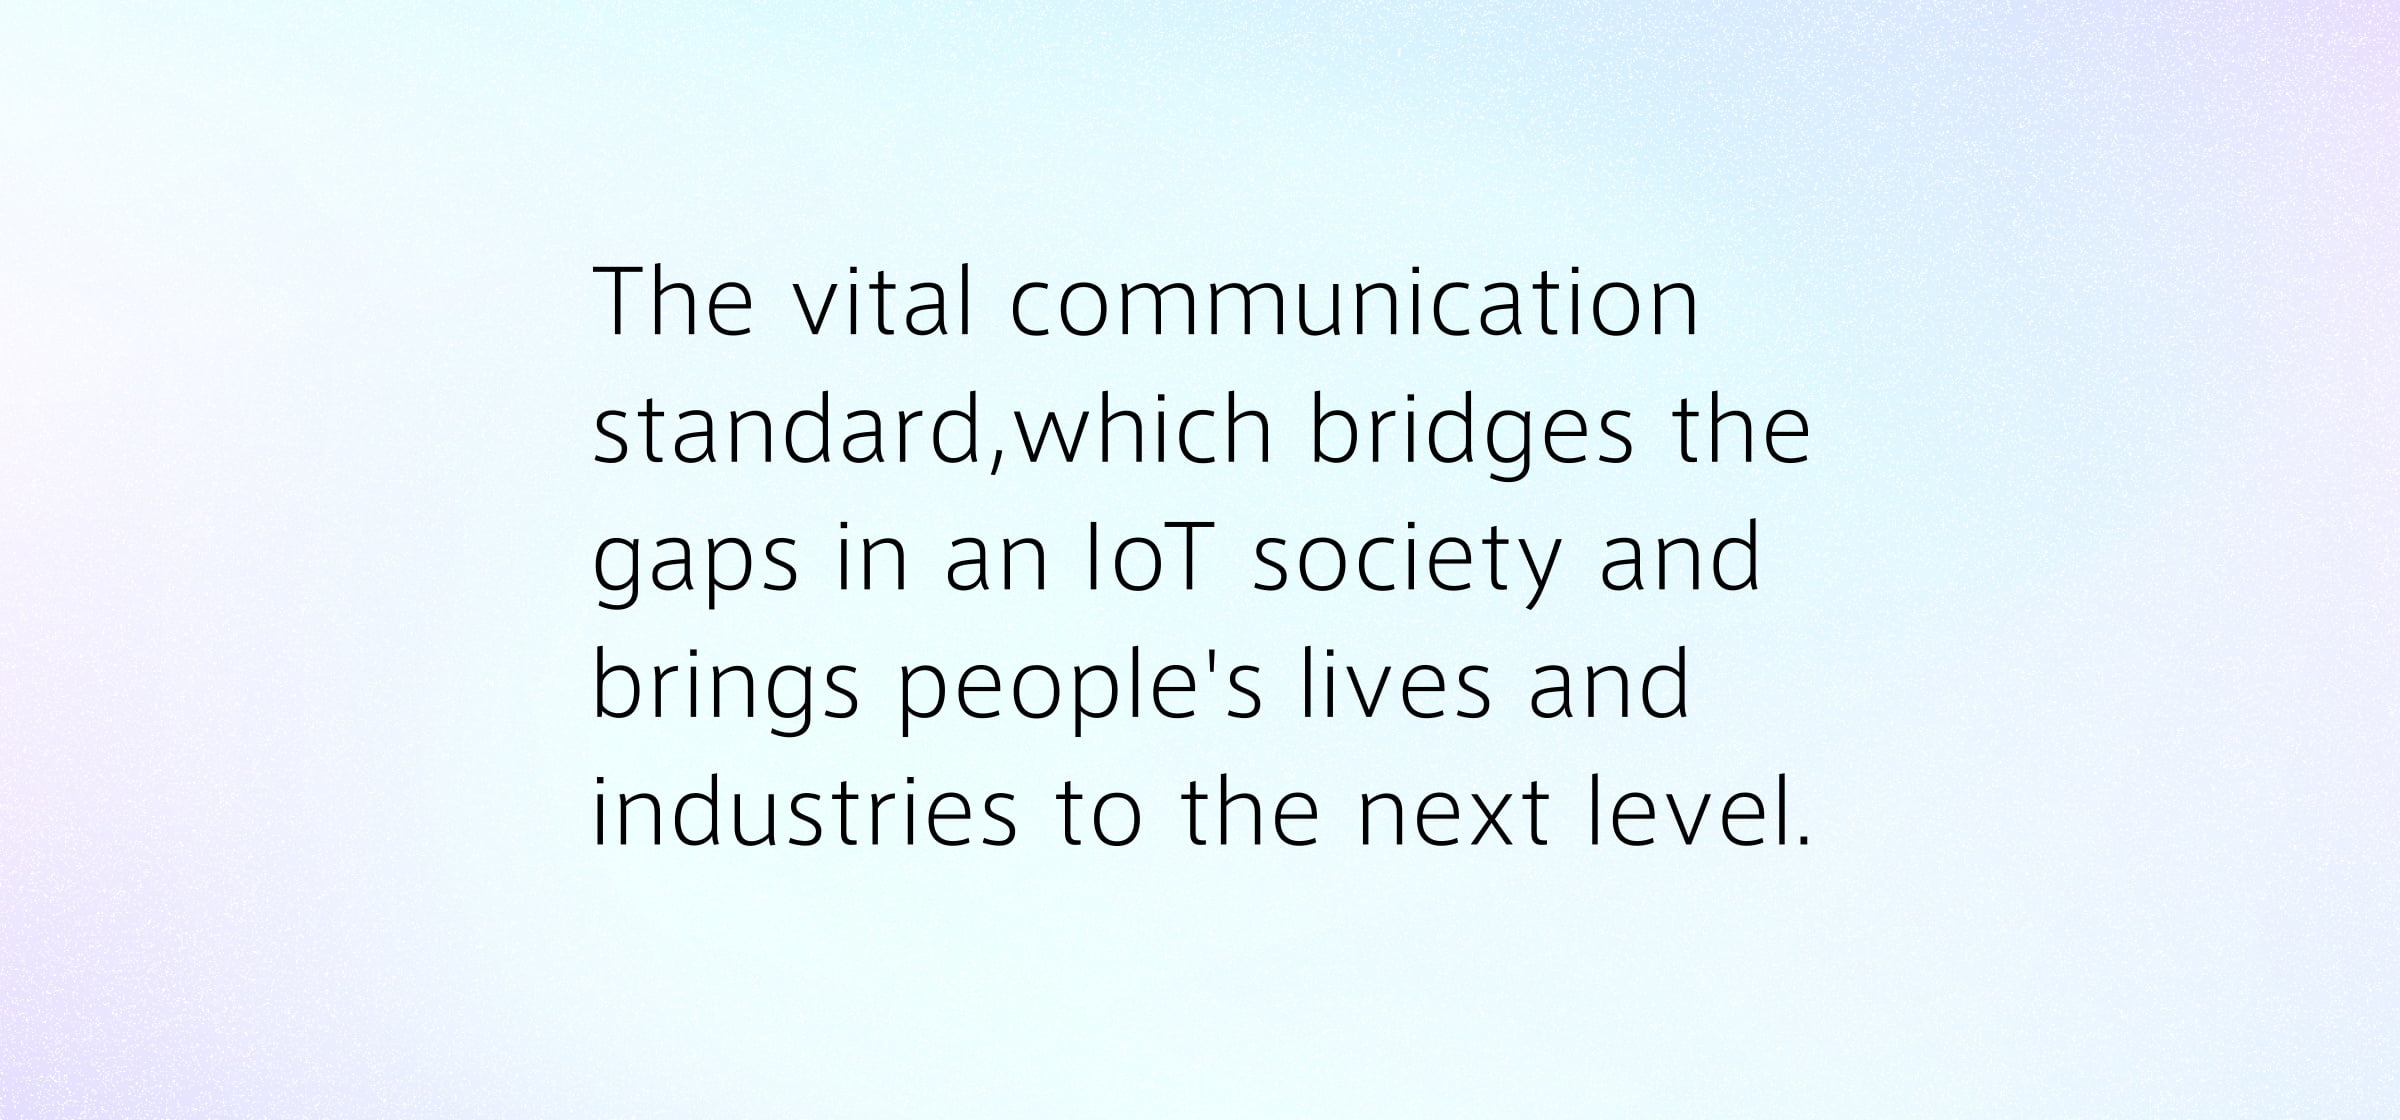 The vital communication standard,which bridges the gaps in an IoT society and brings people's lives and industries to the next level.